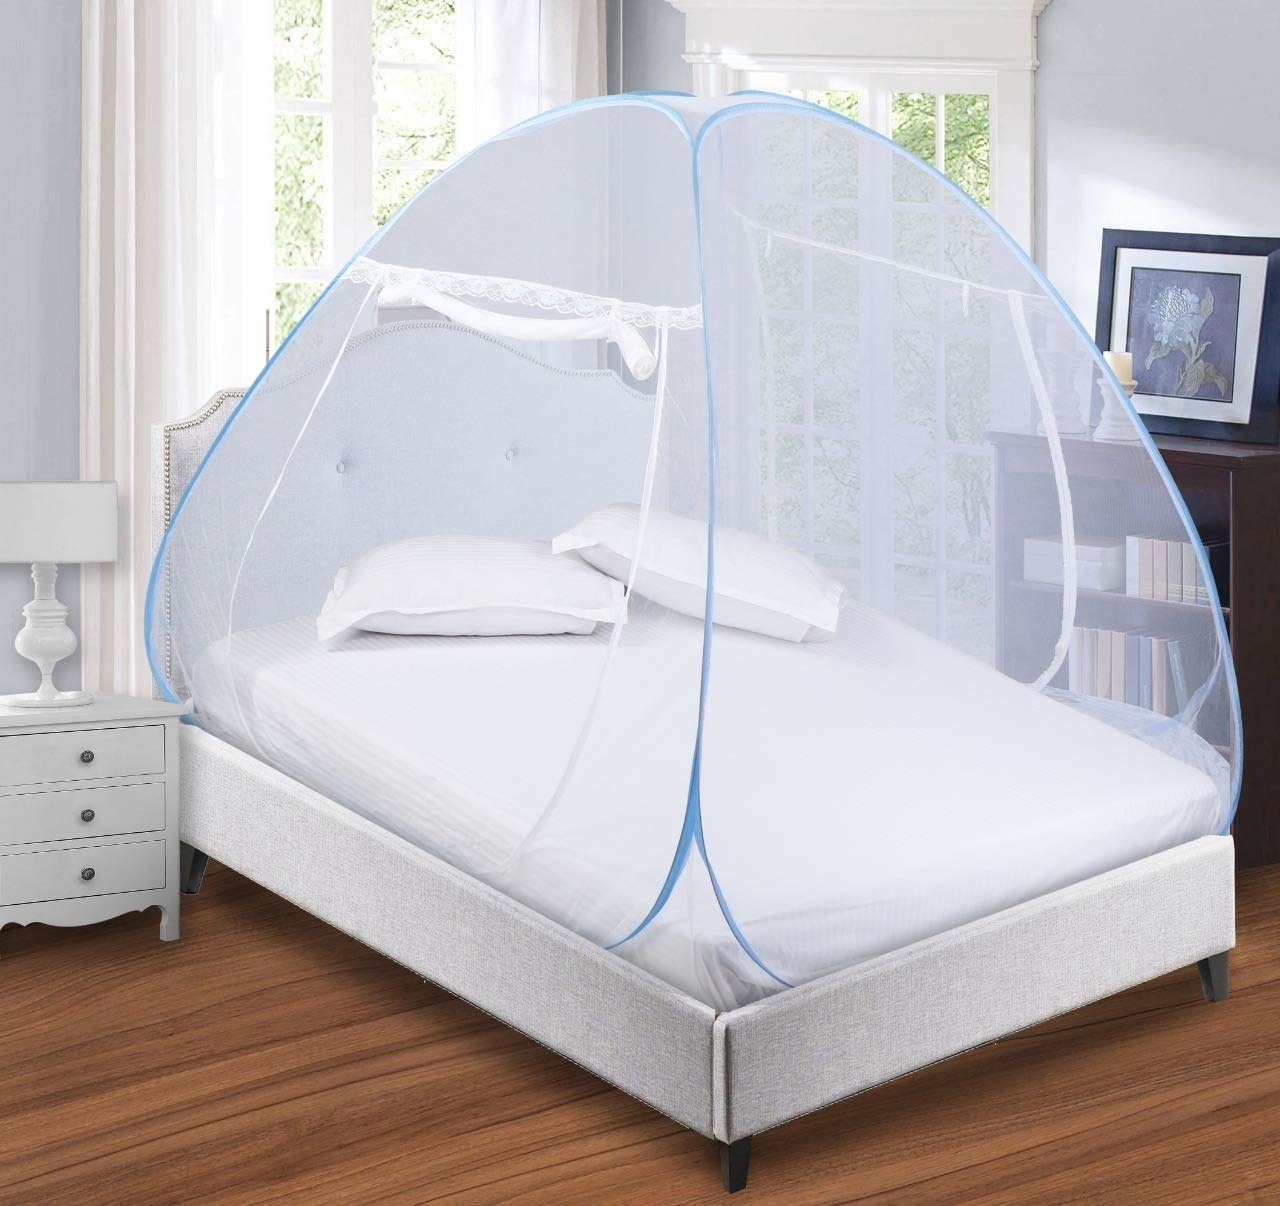 A white and blue mosquito net tented over a single bed.